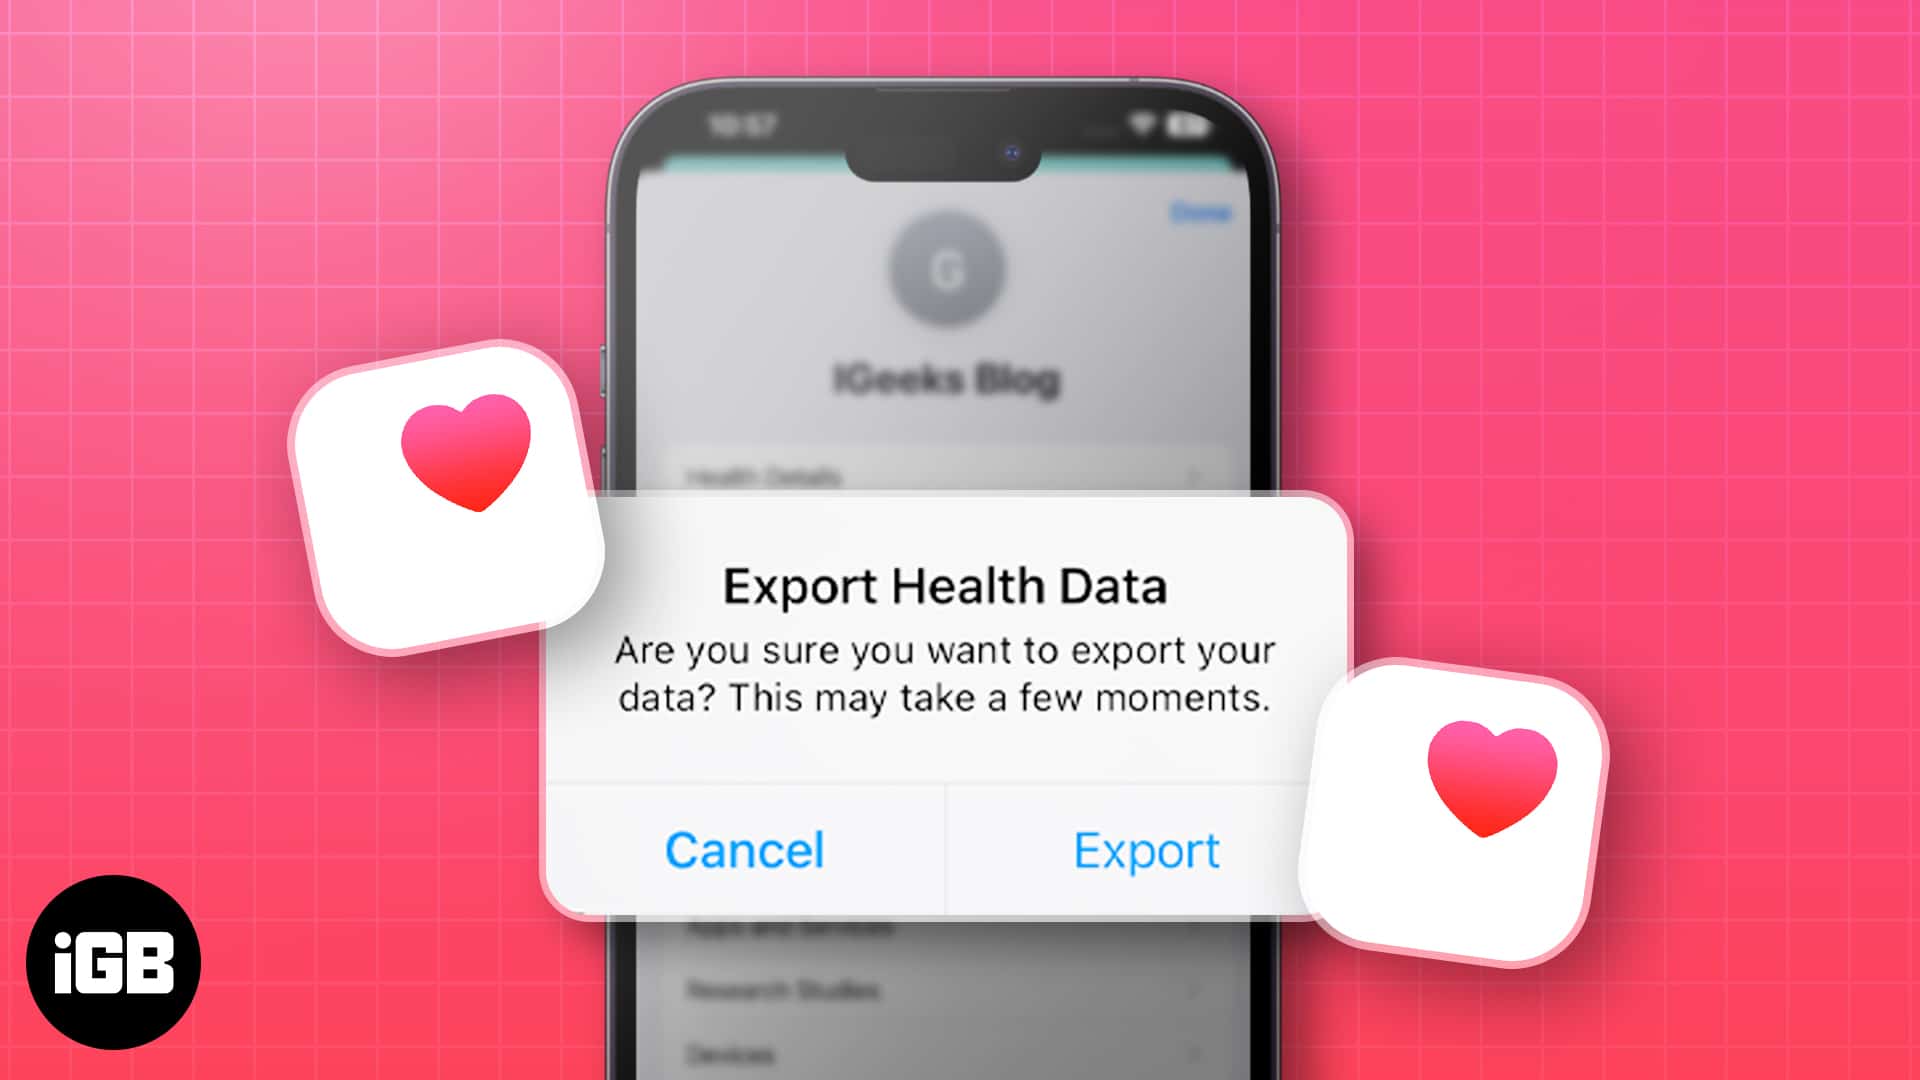 Export health data from your iphone